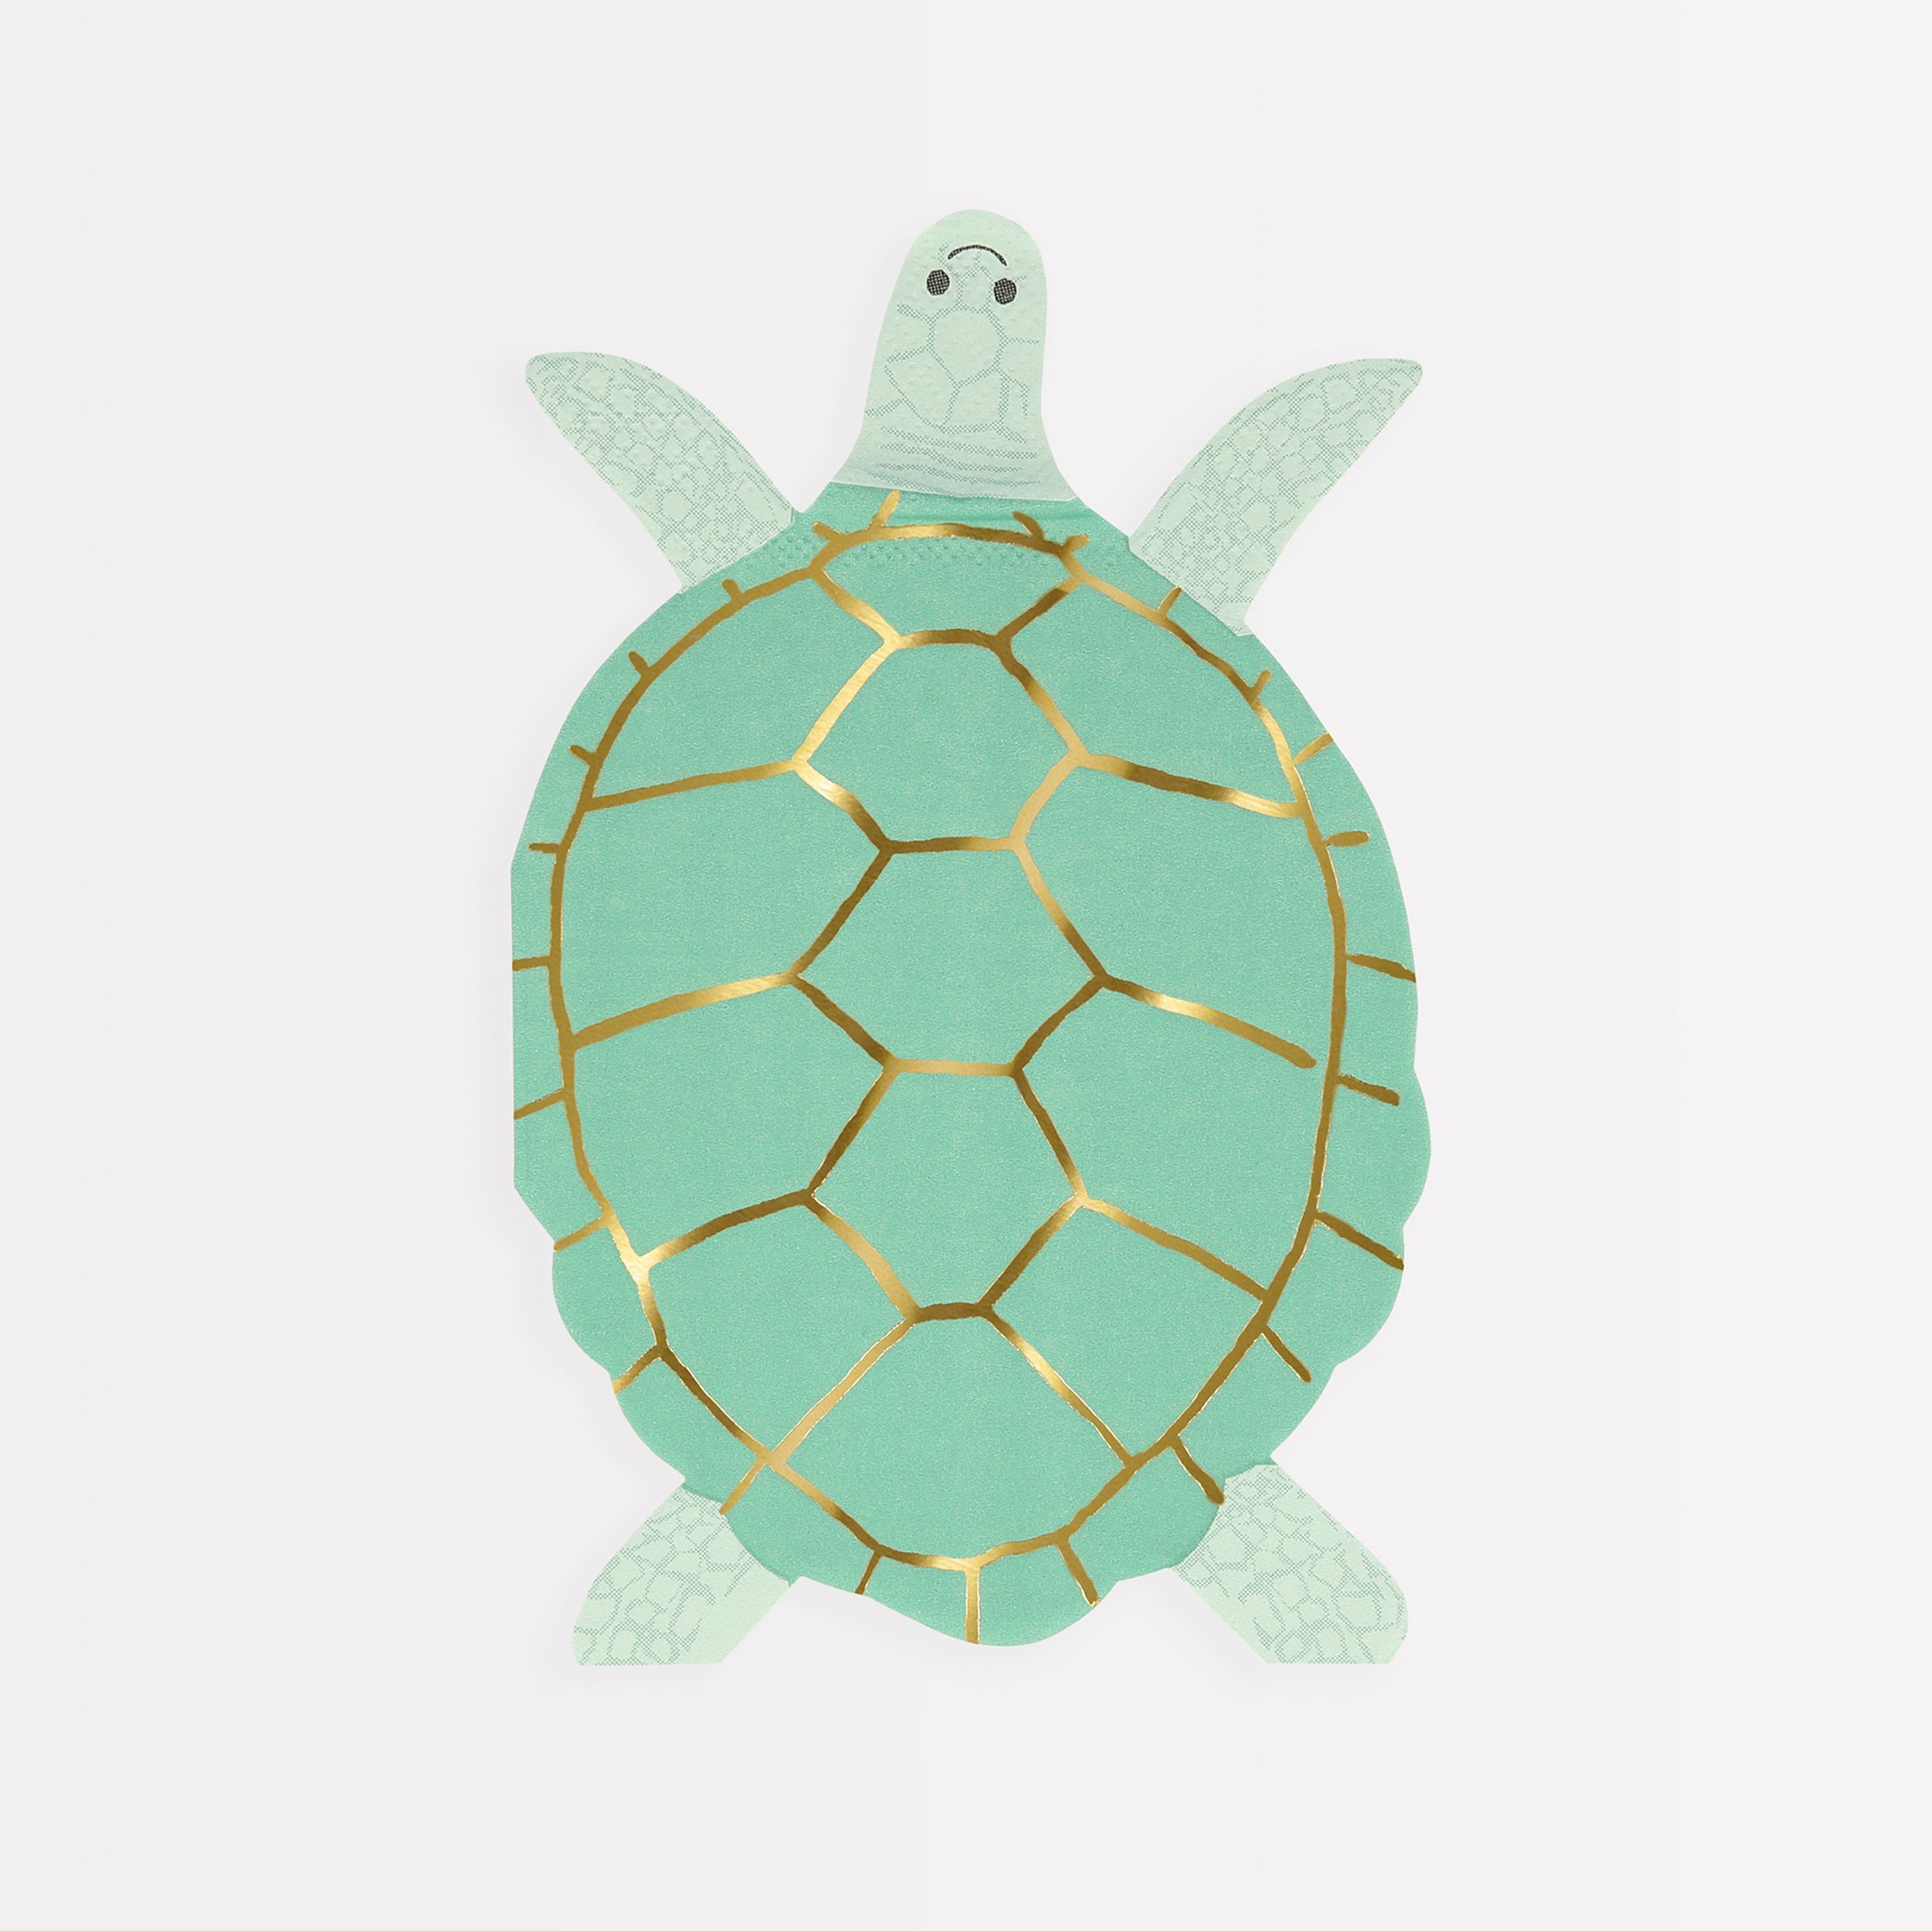 Our party napkins, in the shape of turtles, are perfect as cocktail napkins or for an under-the-sea birthday party.